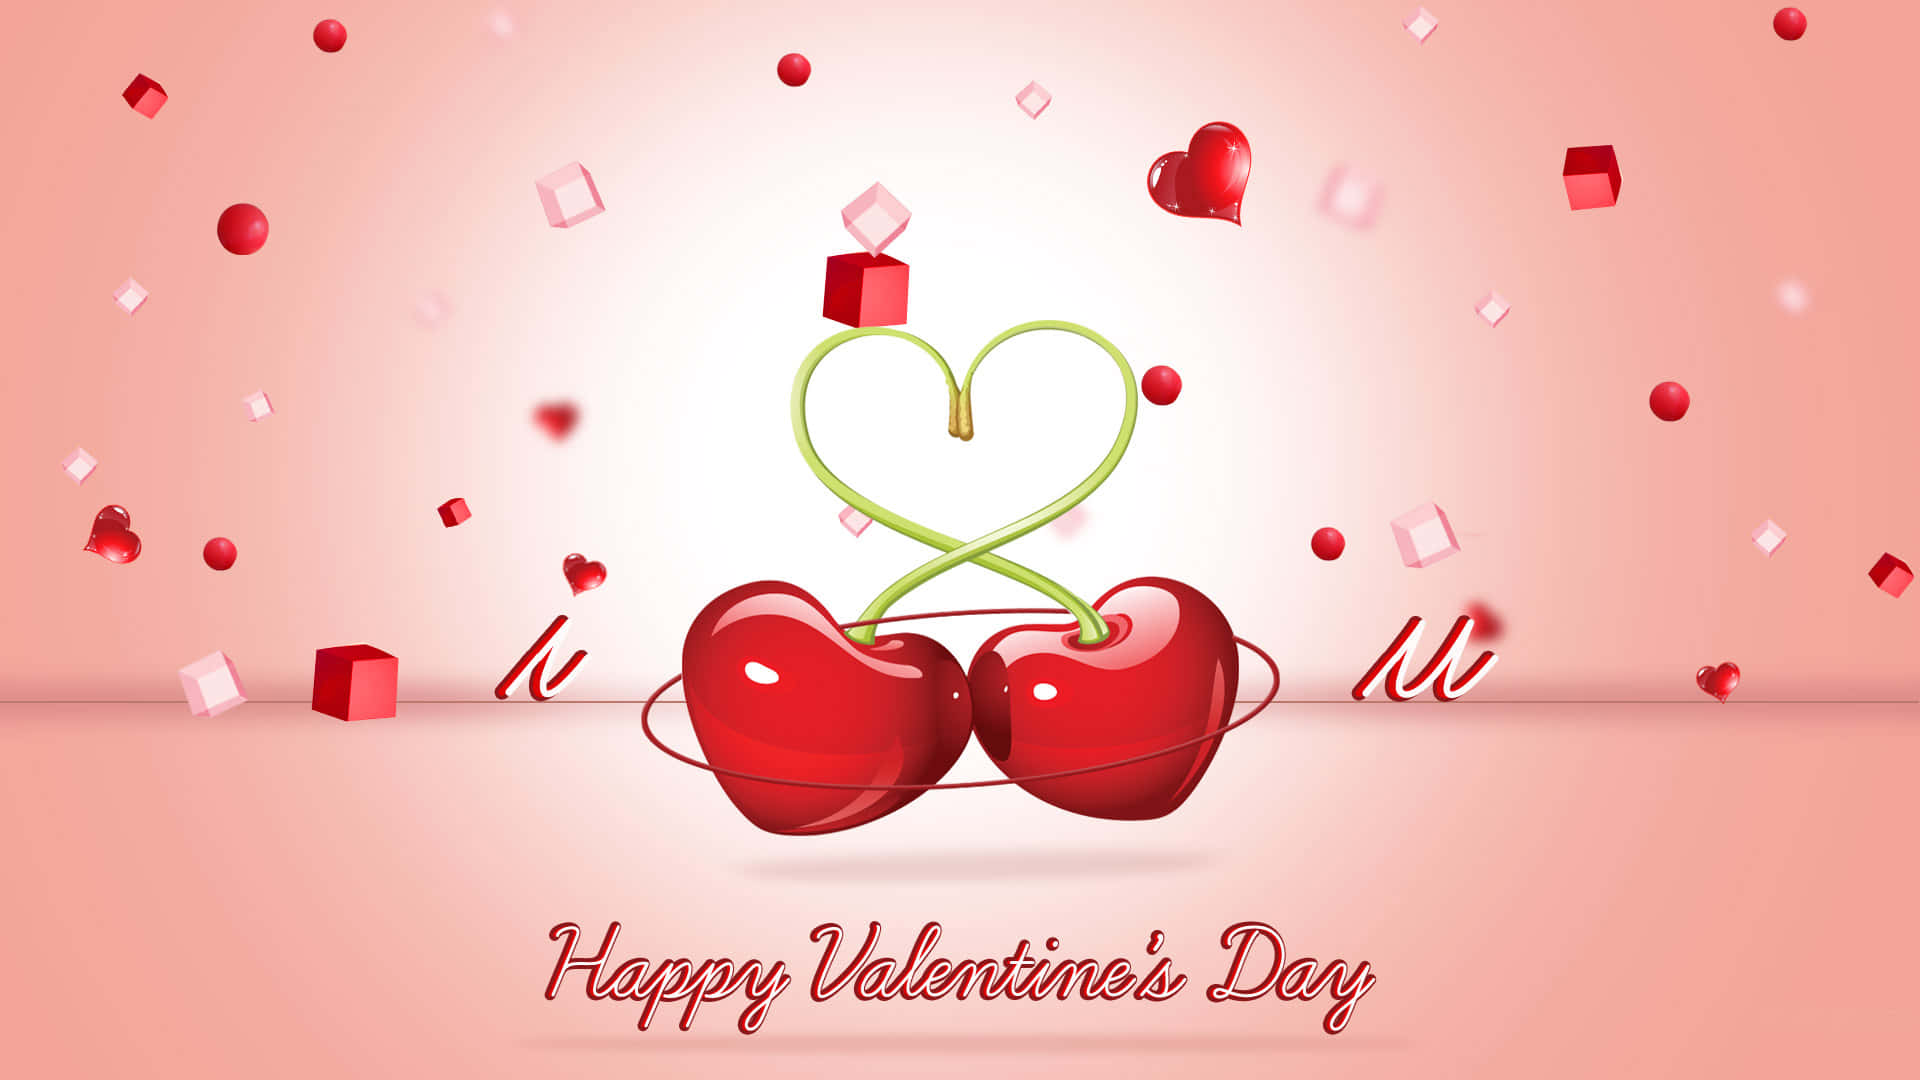 Romantic Happy Valentine's Day Background with Hearts and Roses